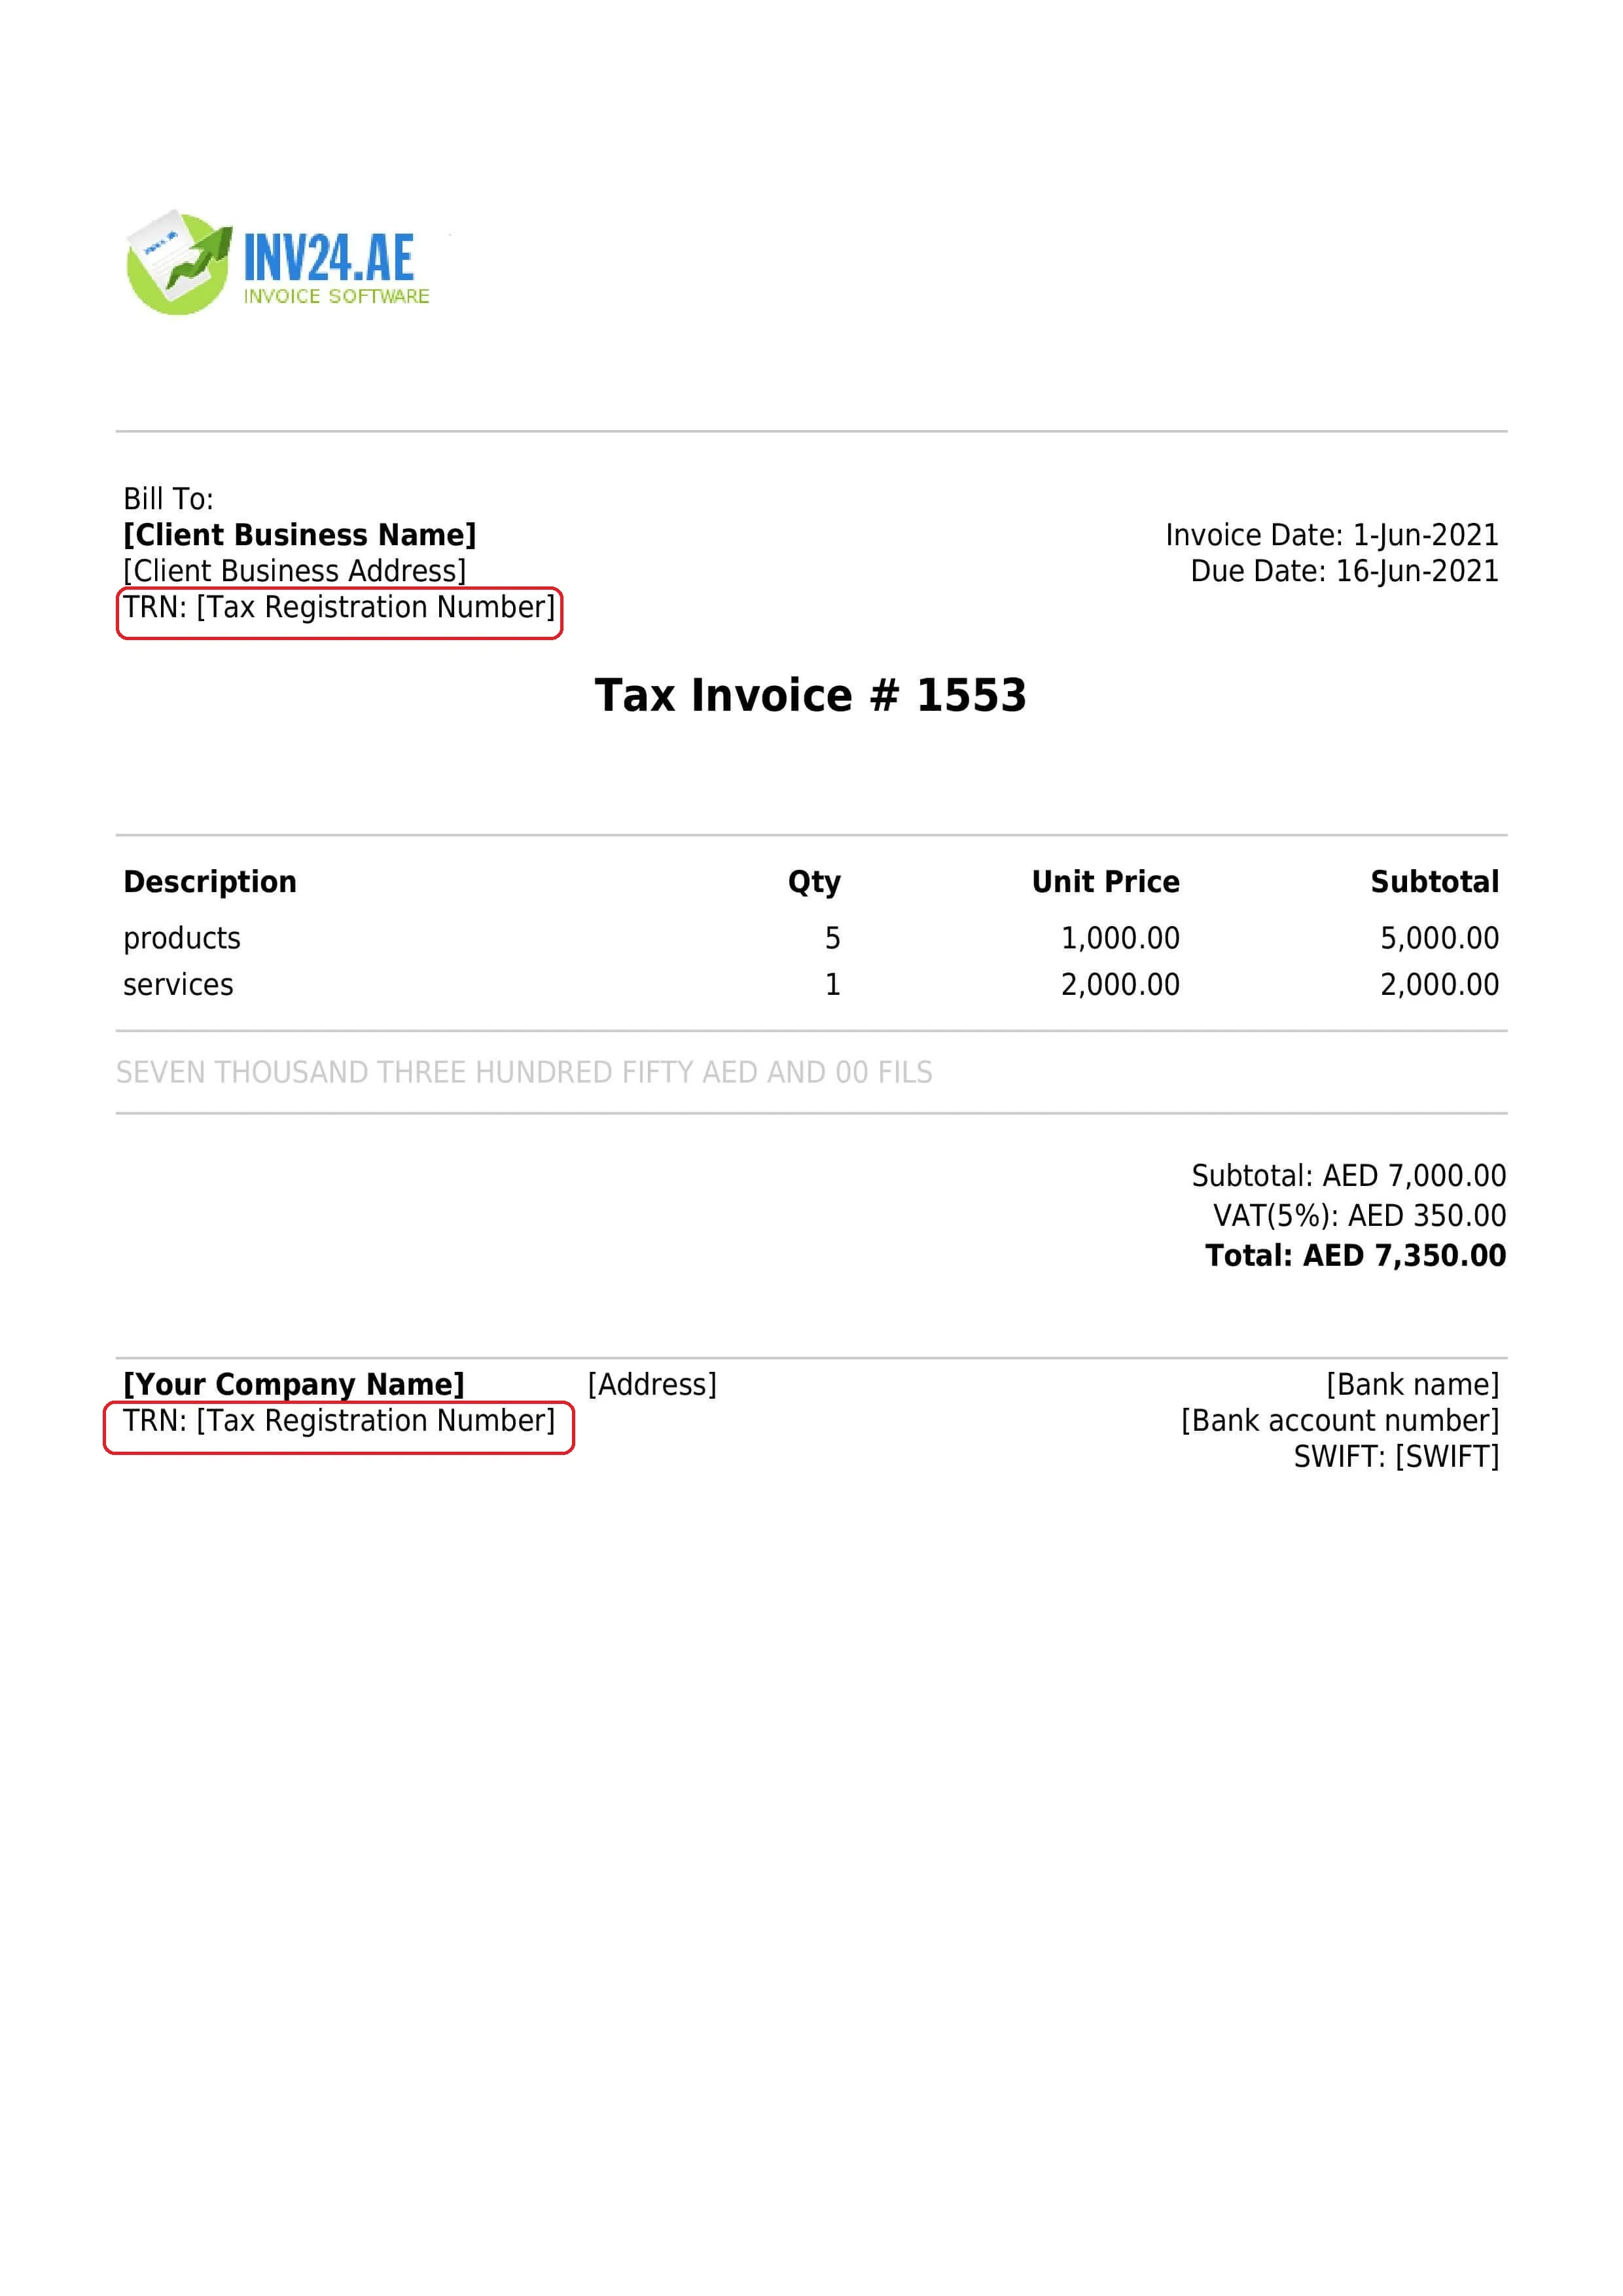 Tax Registration Number (TRN) on the invoice